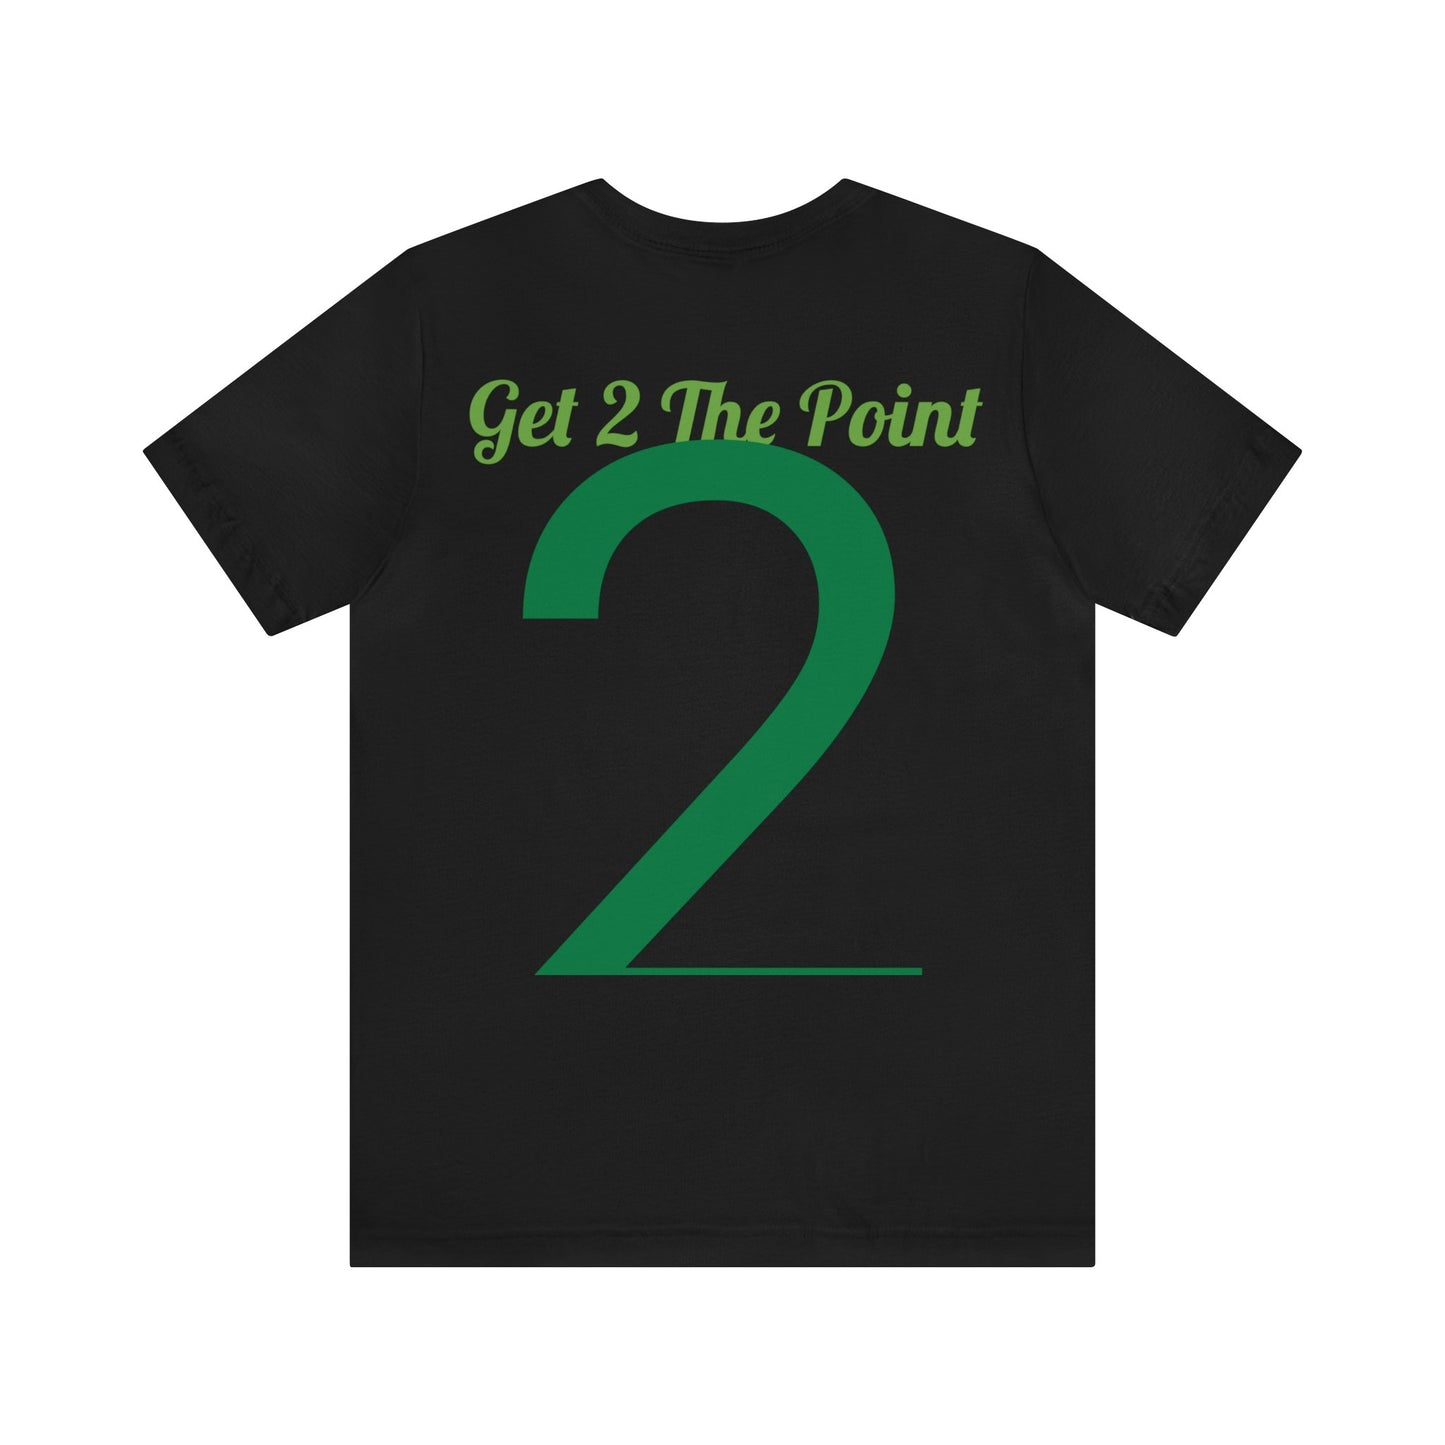 On~Point Apparel